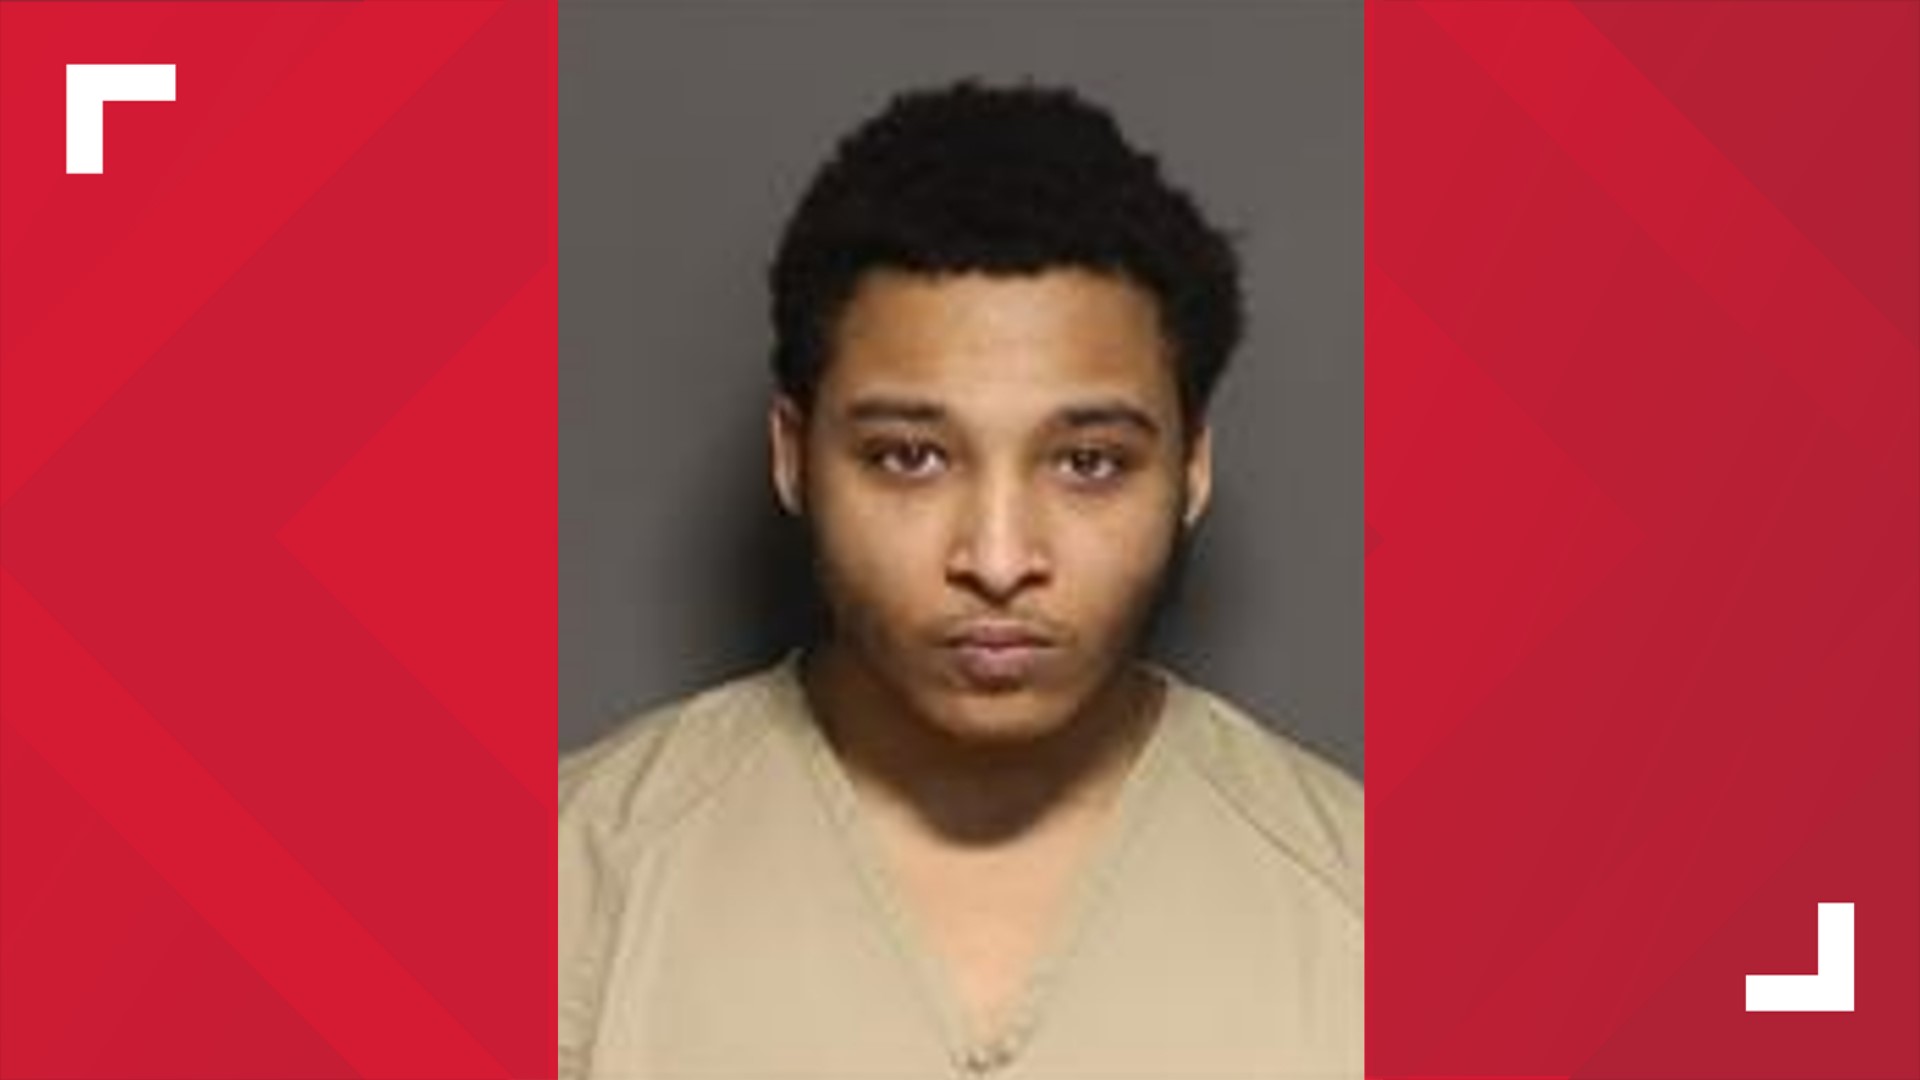 Rickey Hill, 19, was charged with two counts of felonious assault in connection with the shooting on Aug. 17, 2023.